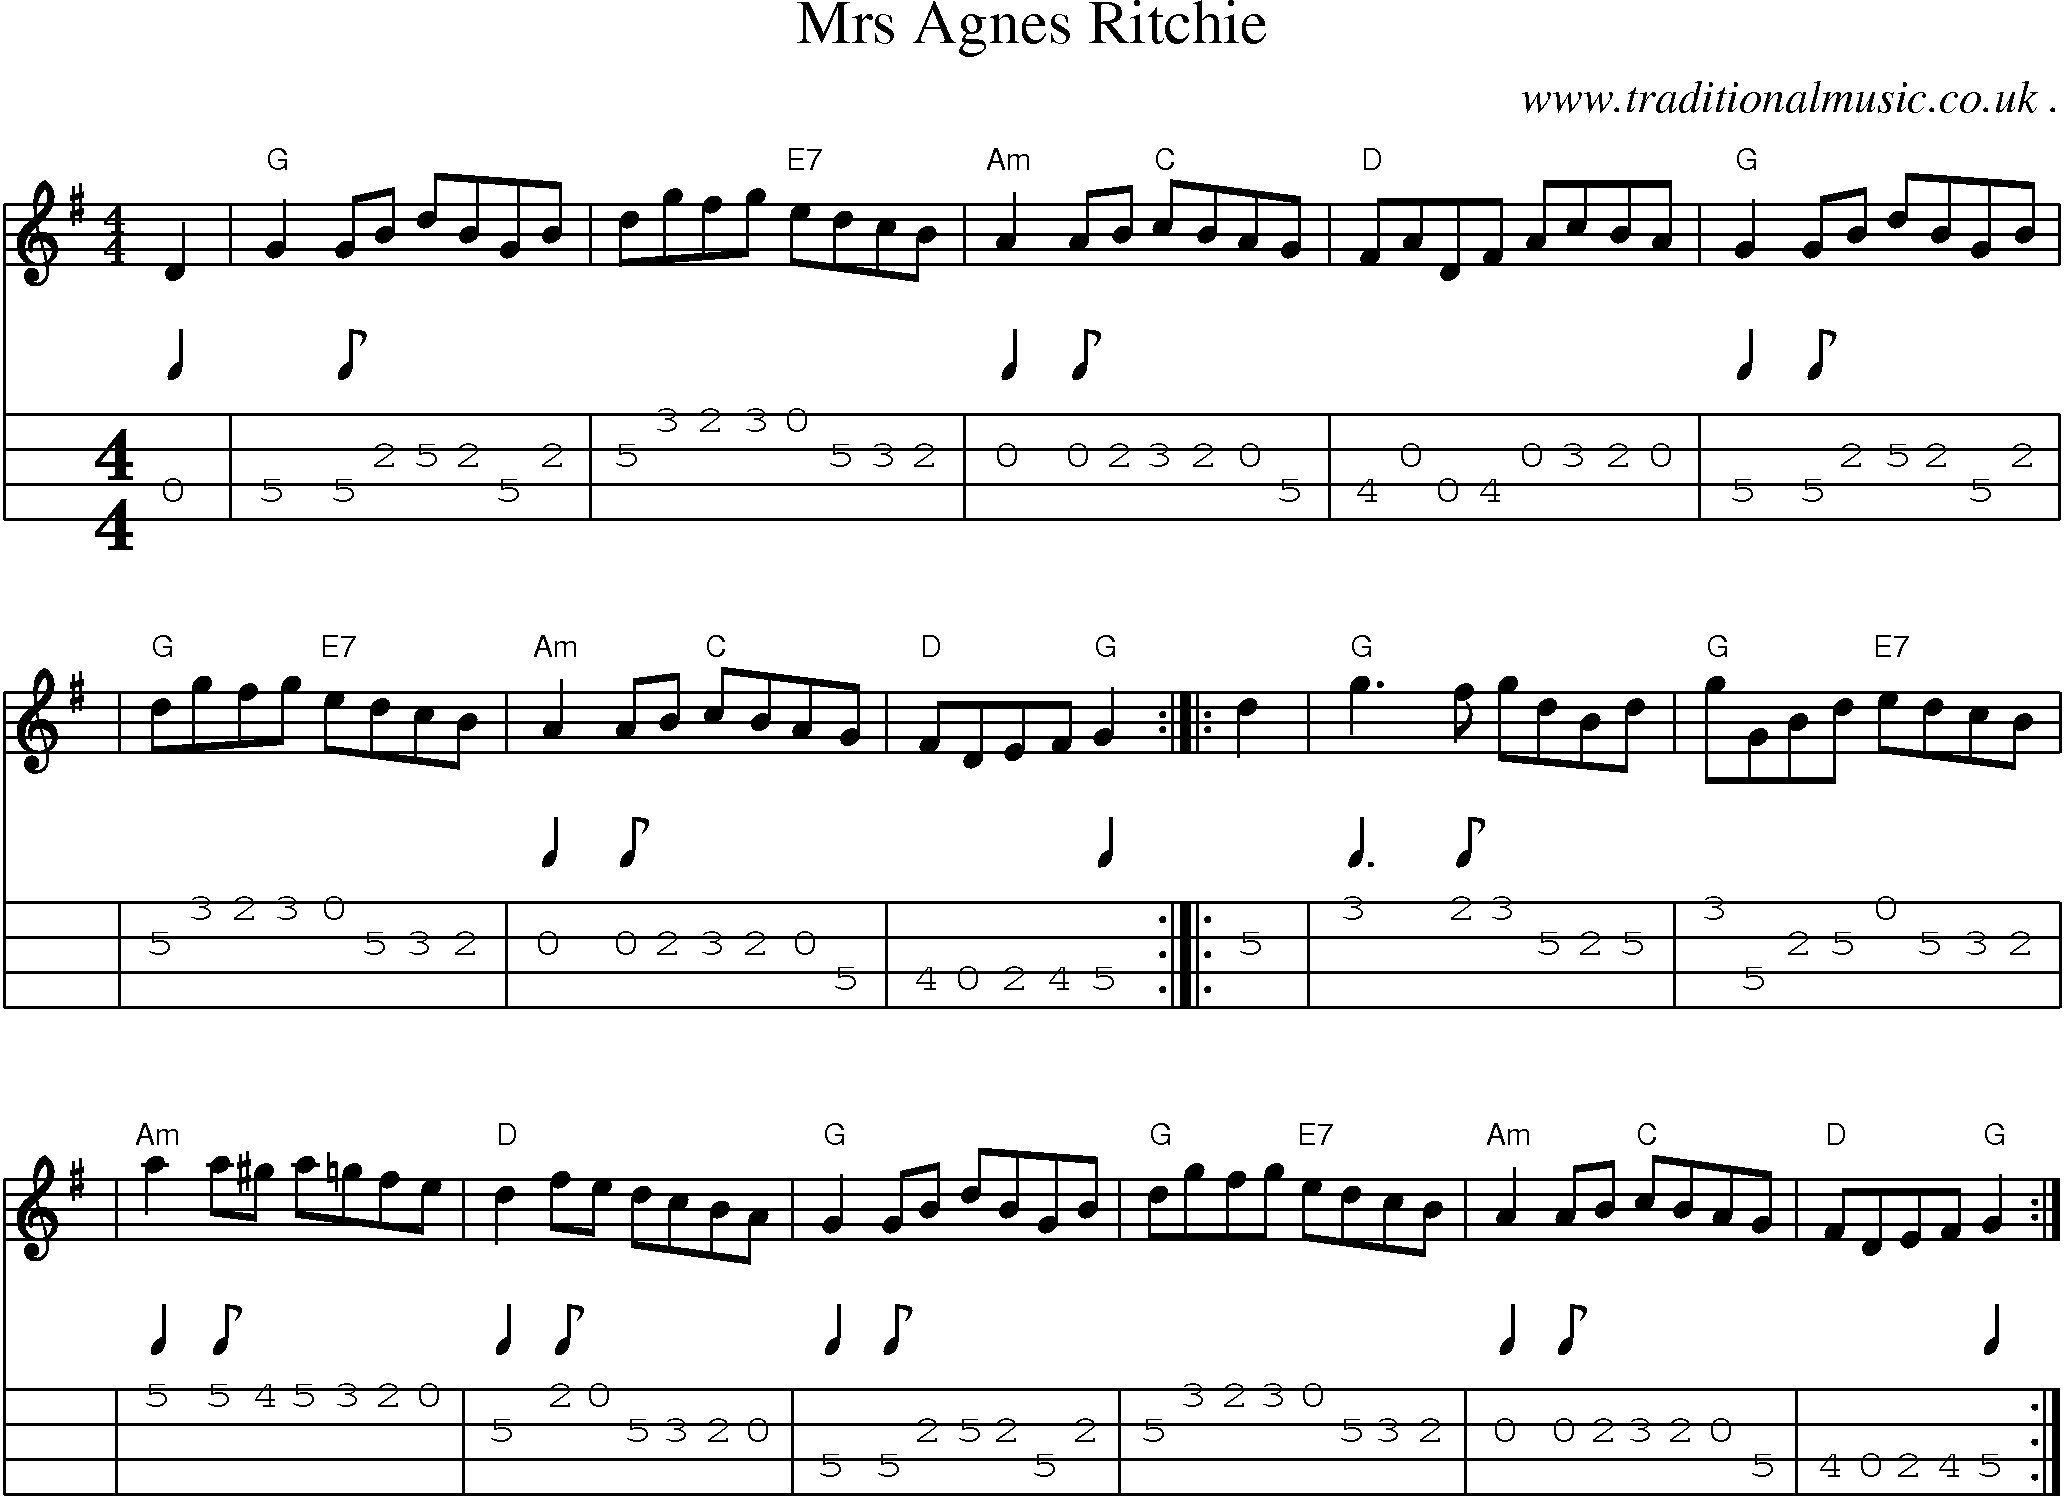 Sheet-music  score, Chords and Mandolin Tabs for Mrs Agnes Ritchie